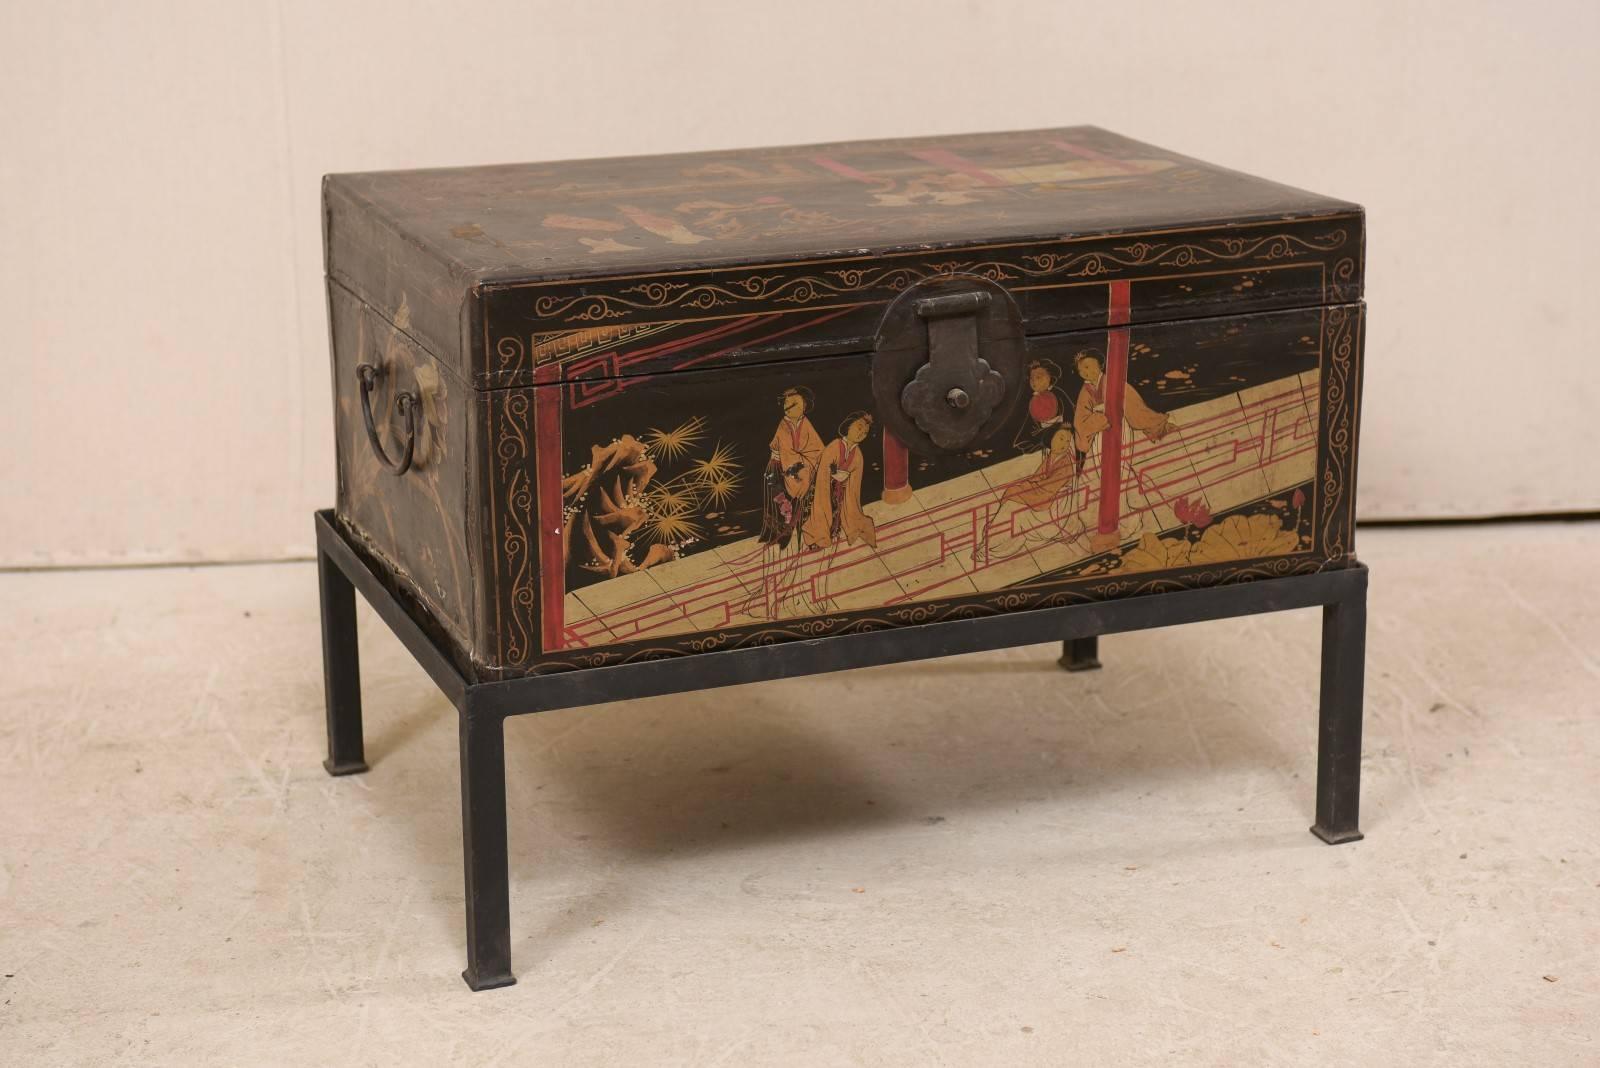 Patinated 19th Century Chinese Painted Leather Trunk Made Unique Table with Custom Base